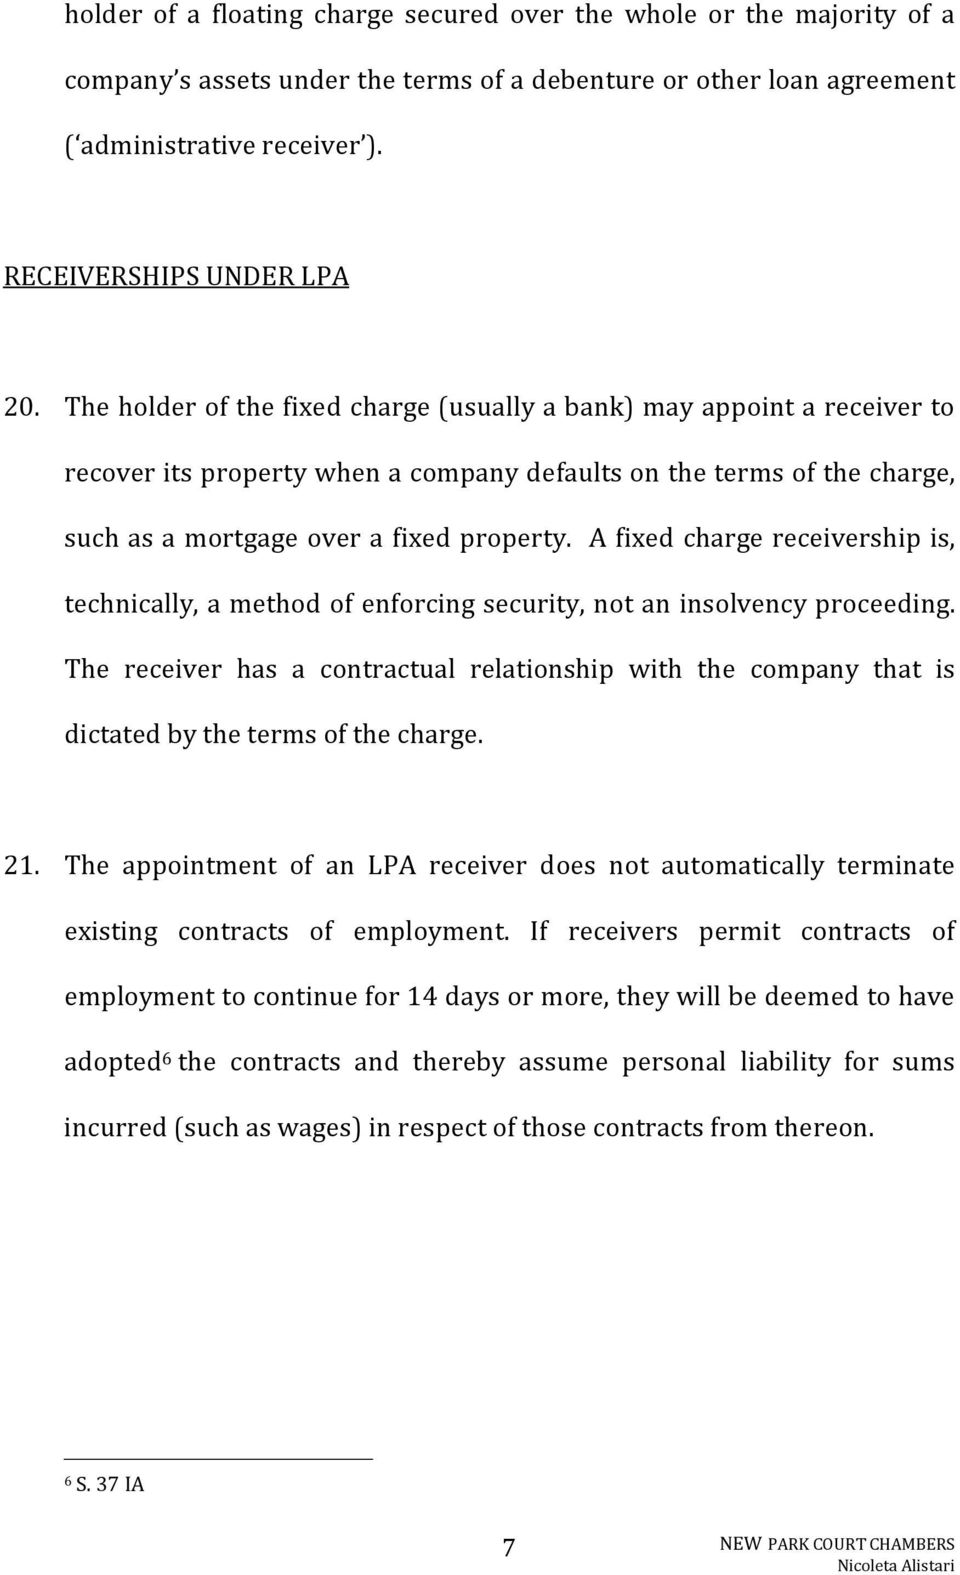 A fixed charge receivership is, technically, a method of enforcing security, not an insolvency proceeding.